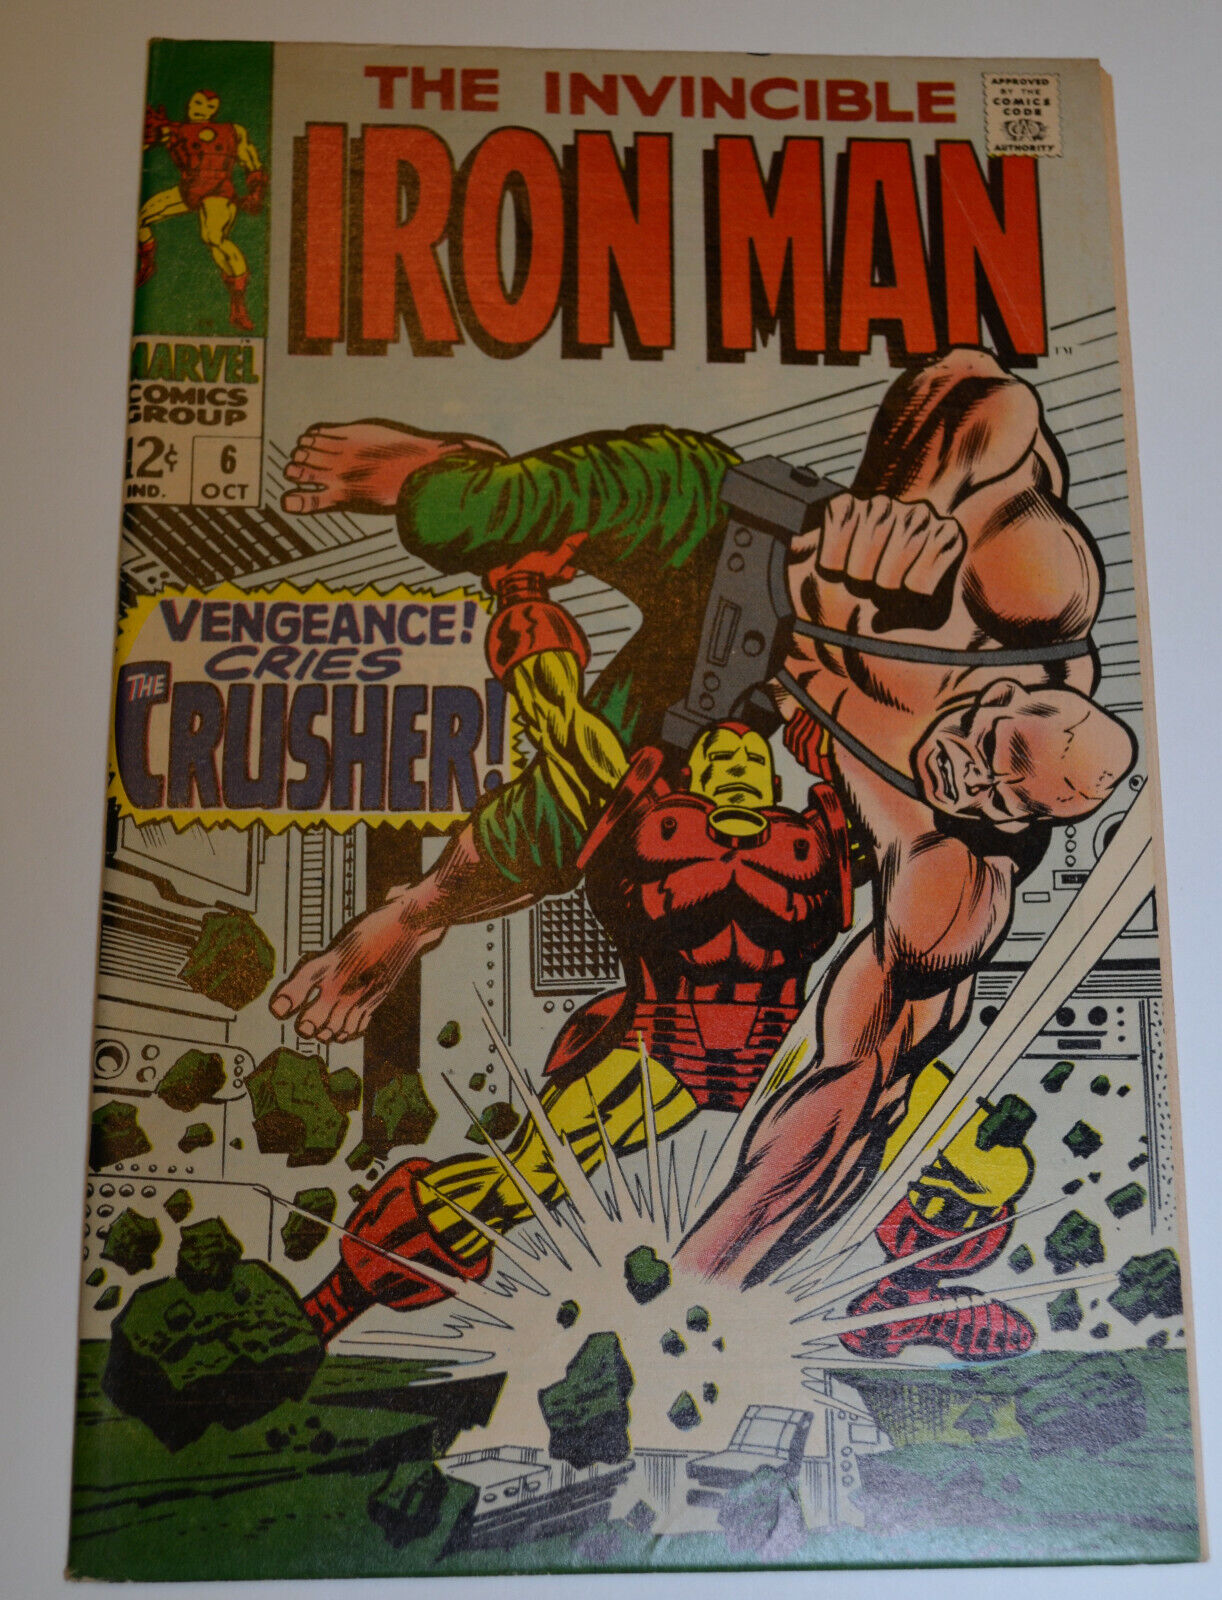 THE INVINCIBLE IRON MAN #6 (OCTOBER, 1968) MARVEL - CRUSHER - Very Good+